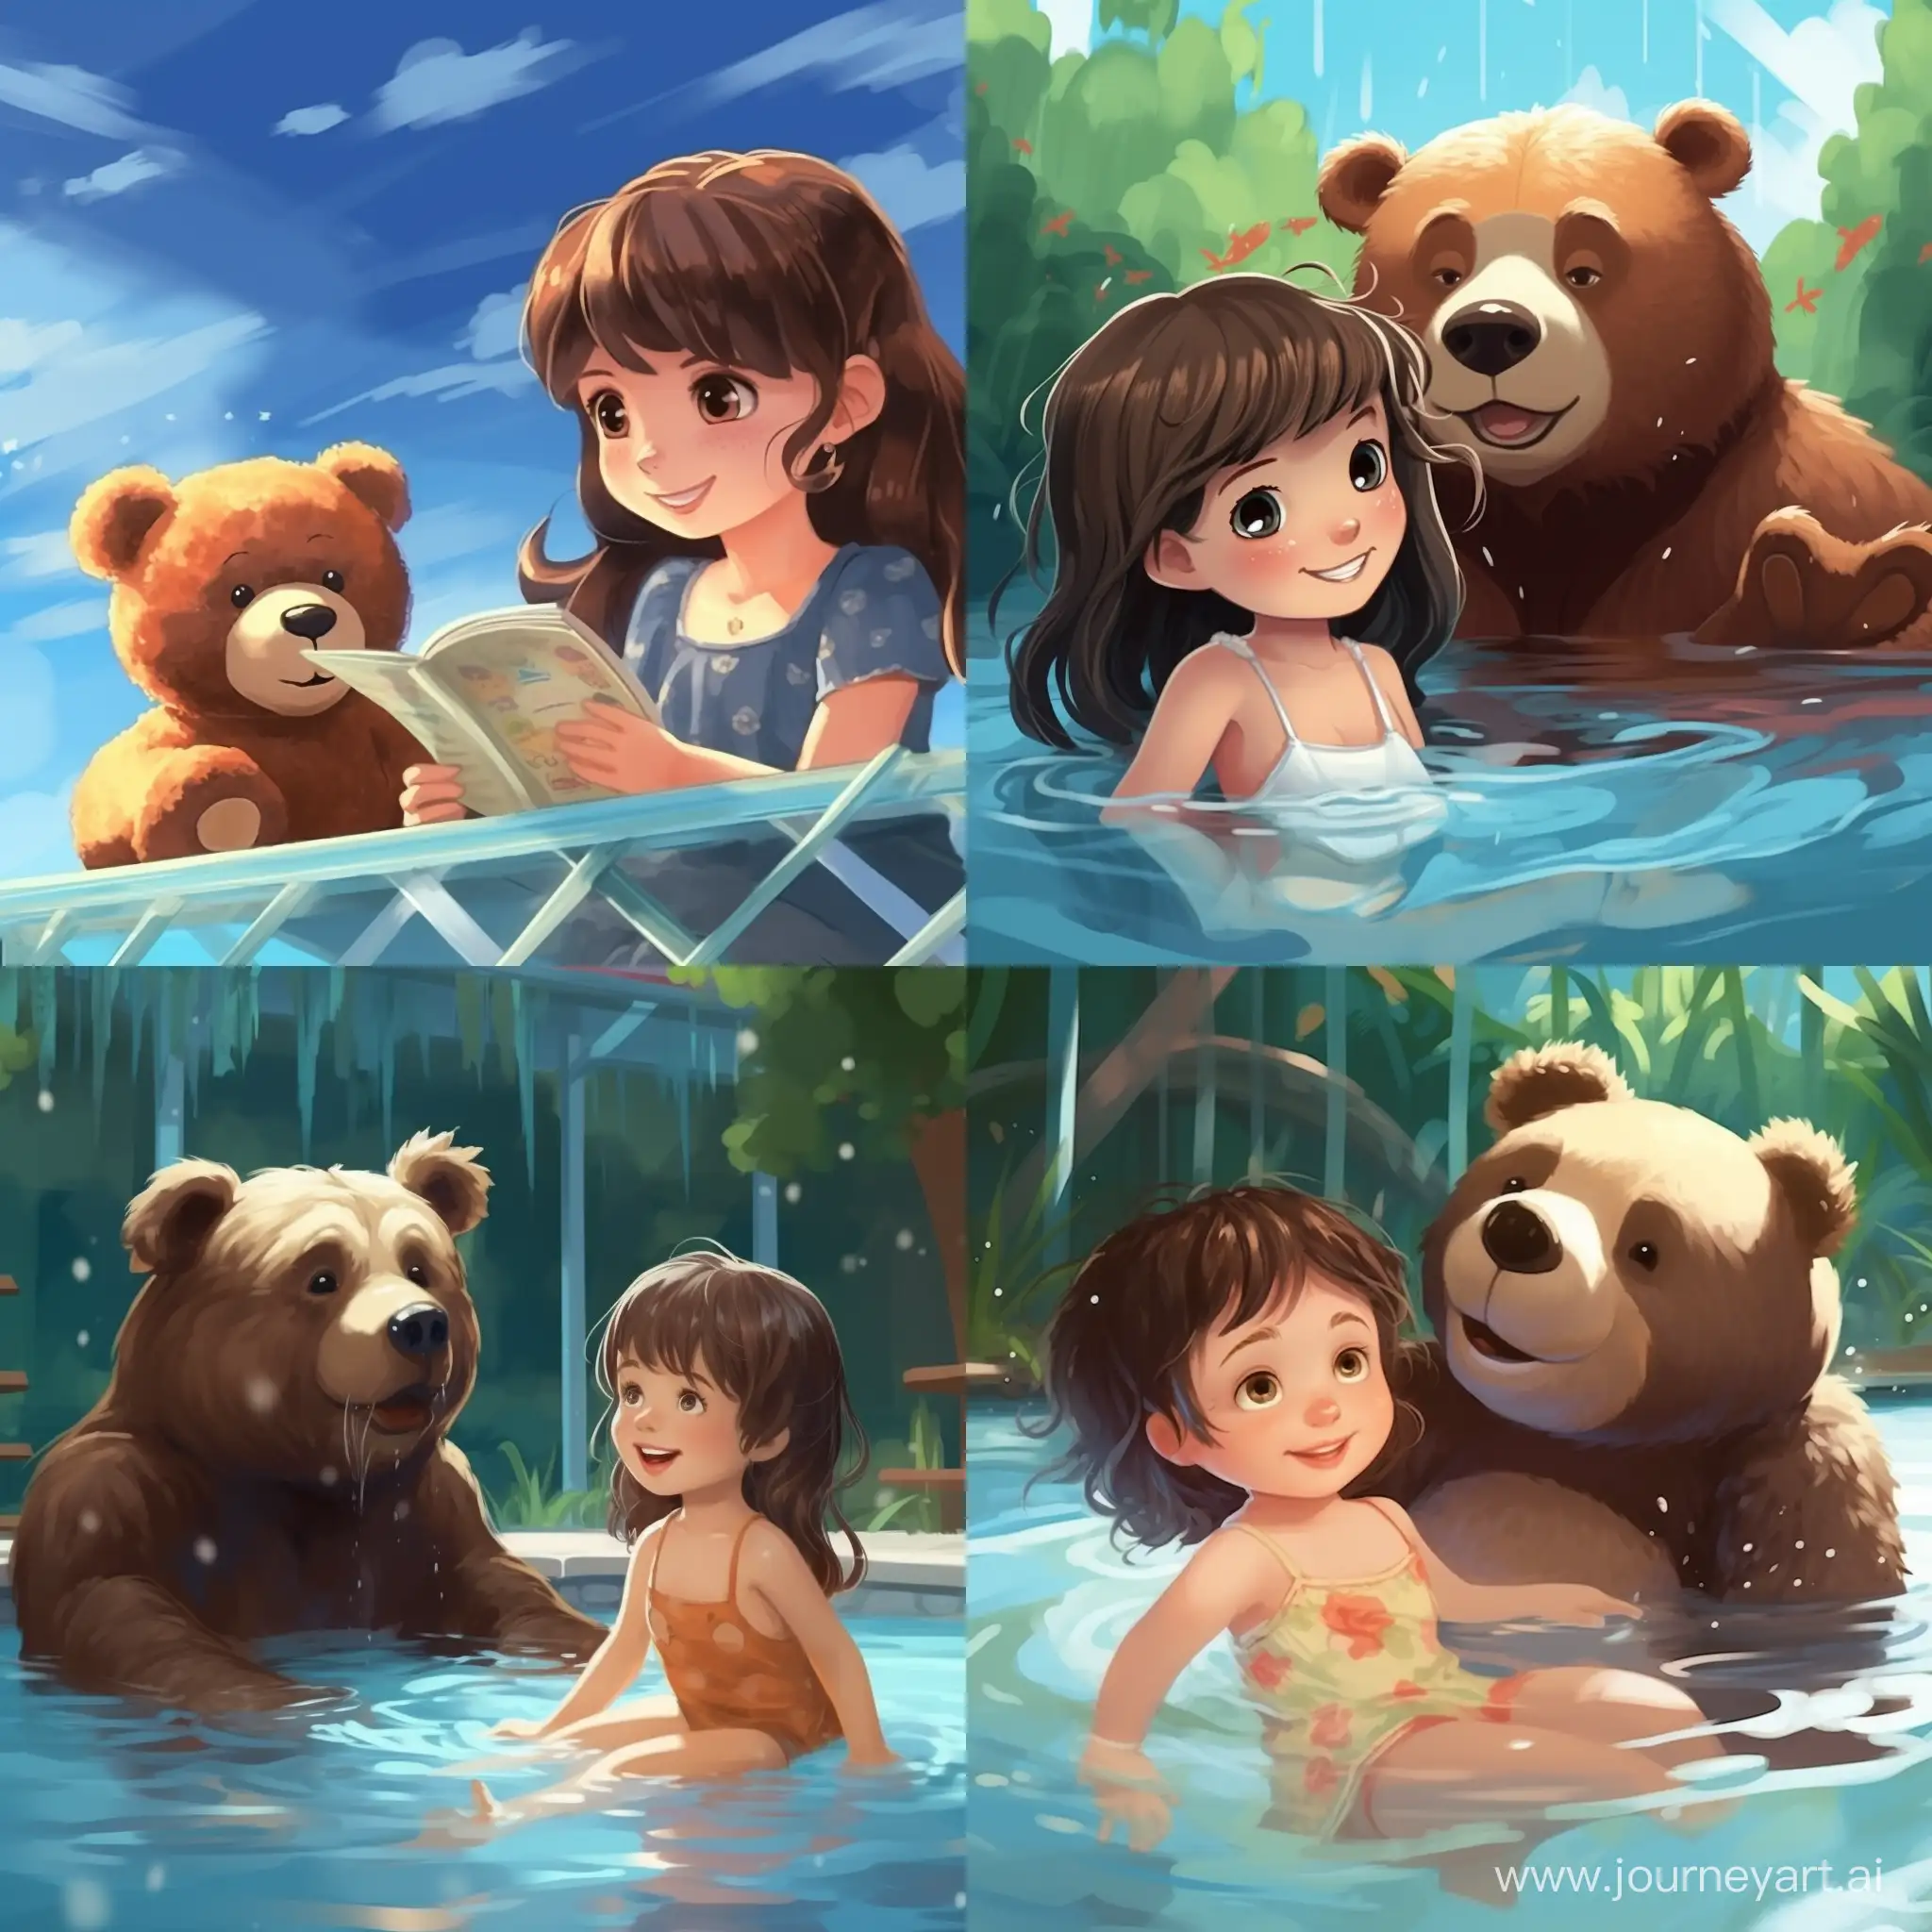 Adorable-Childrens-Story-Little-Girl-and-Baby-Bear-Enjoying-a-Pool-Day